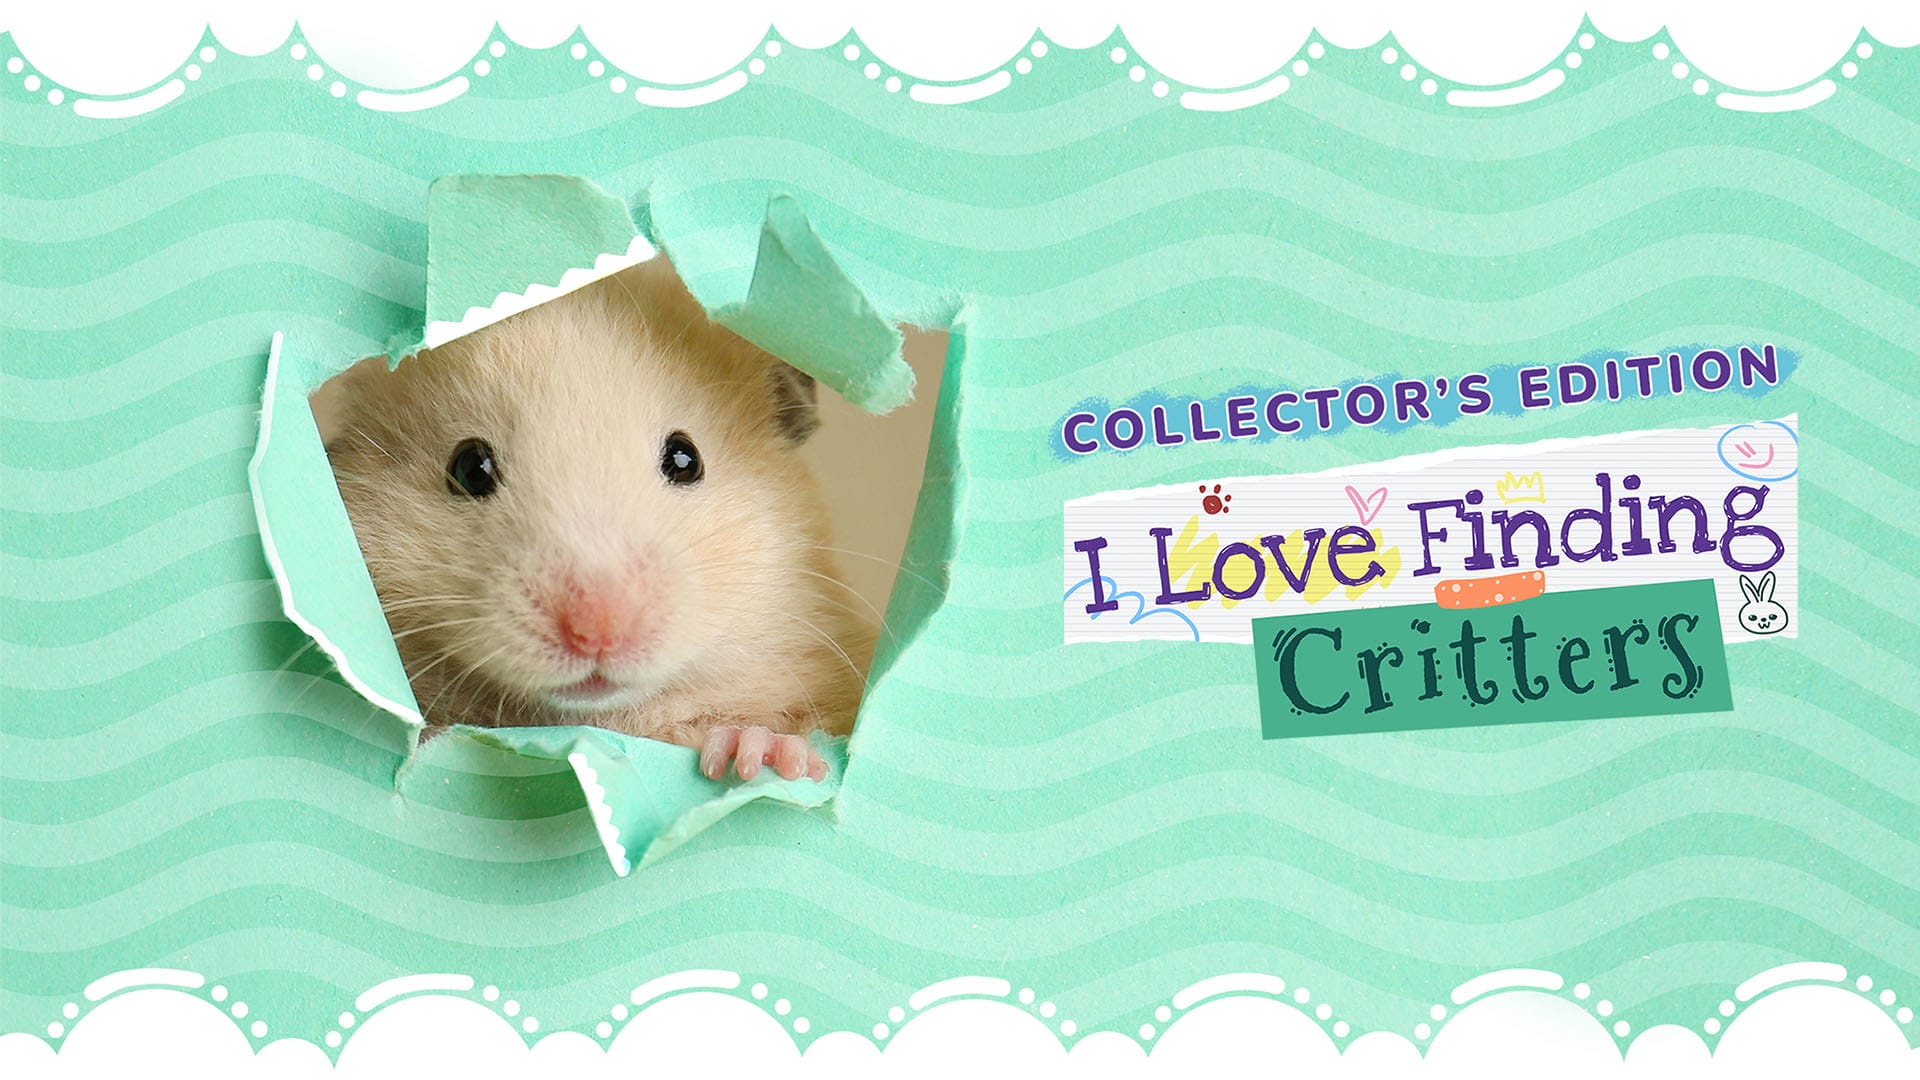 I Love Finding Critters! - Collector's Edition 1